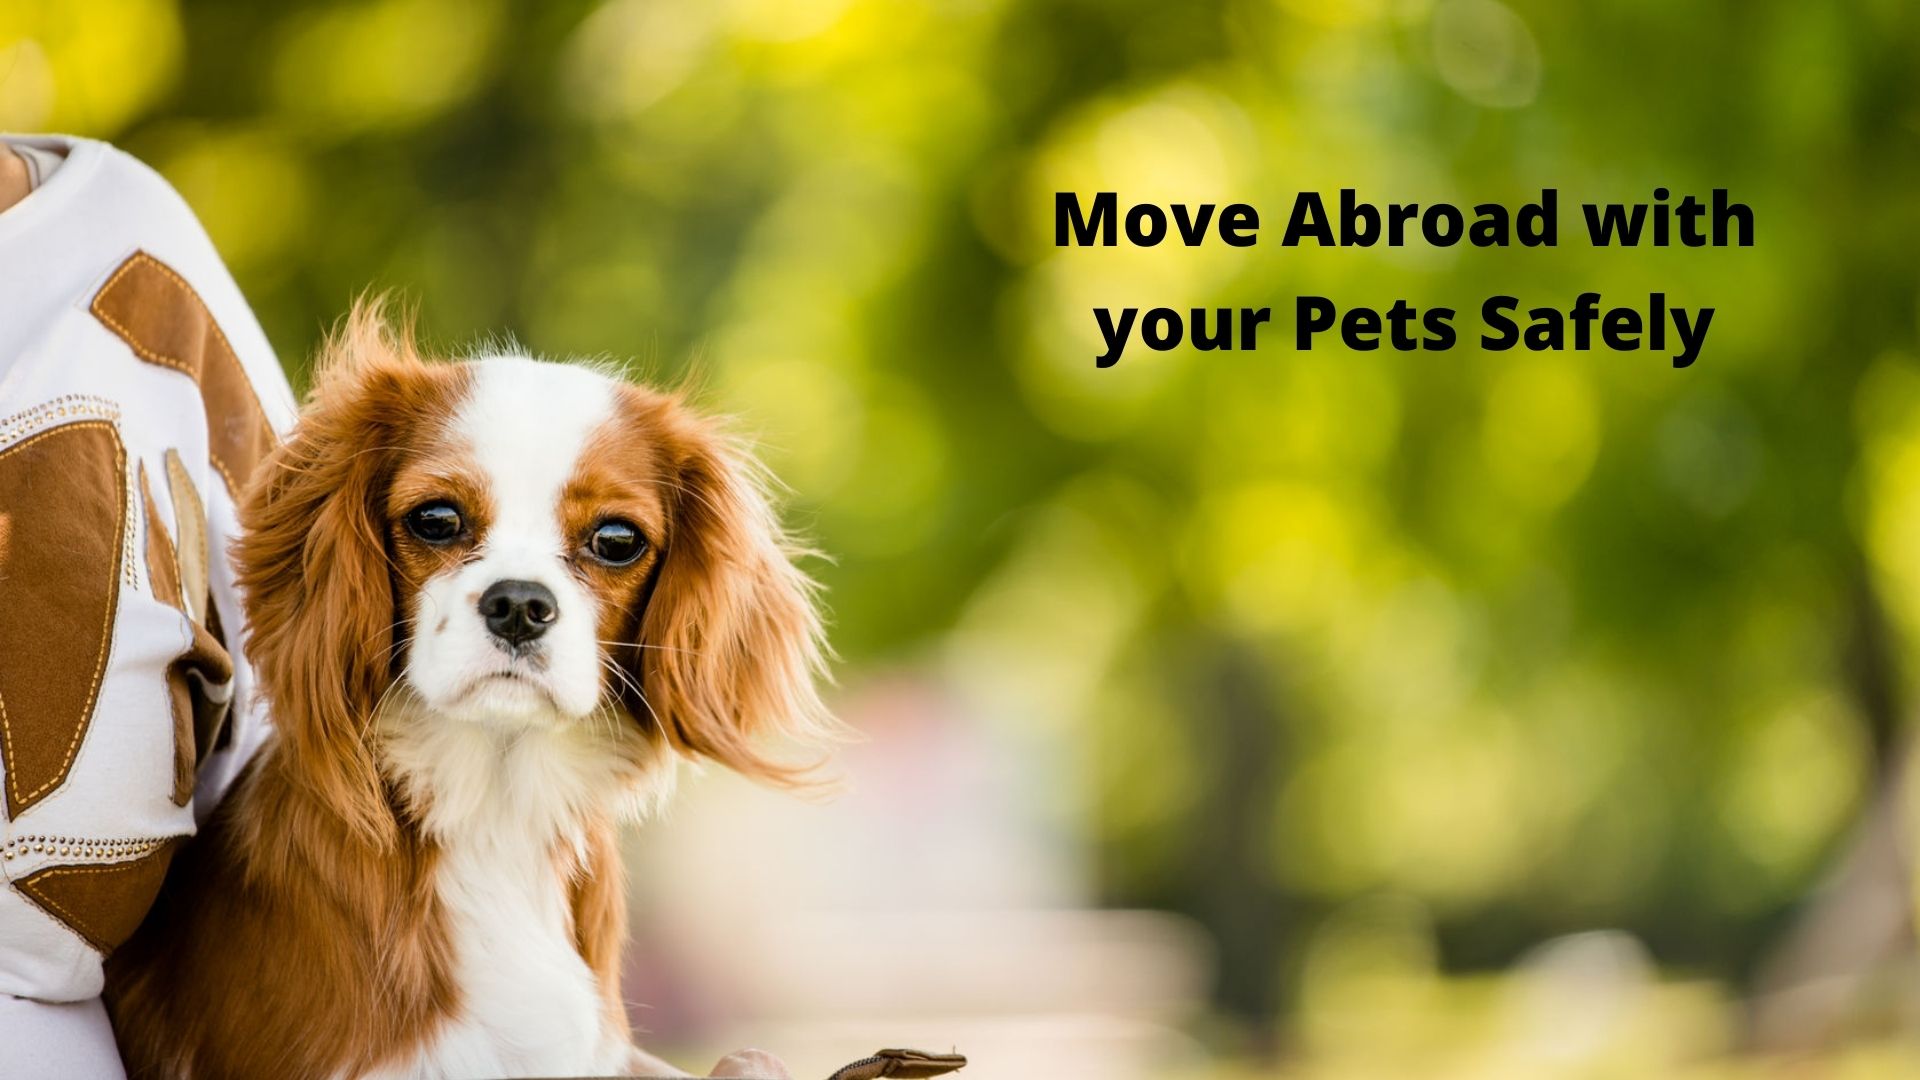 Check Out the Most Feasible Tips to Move Abroad With Your Pets Safely